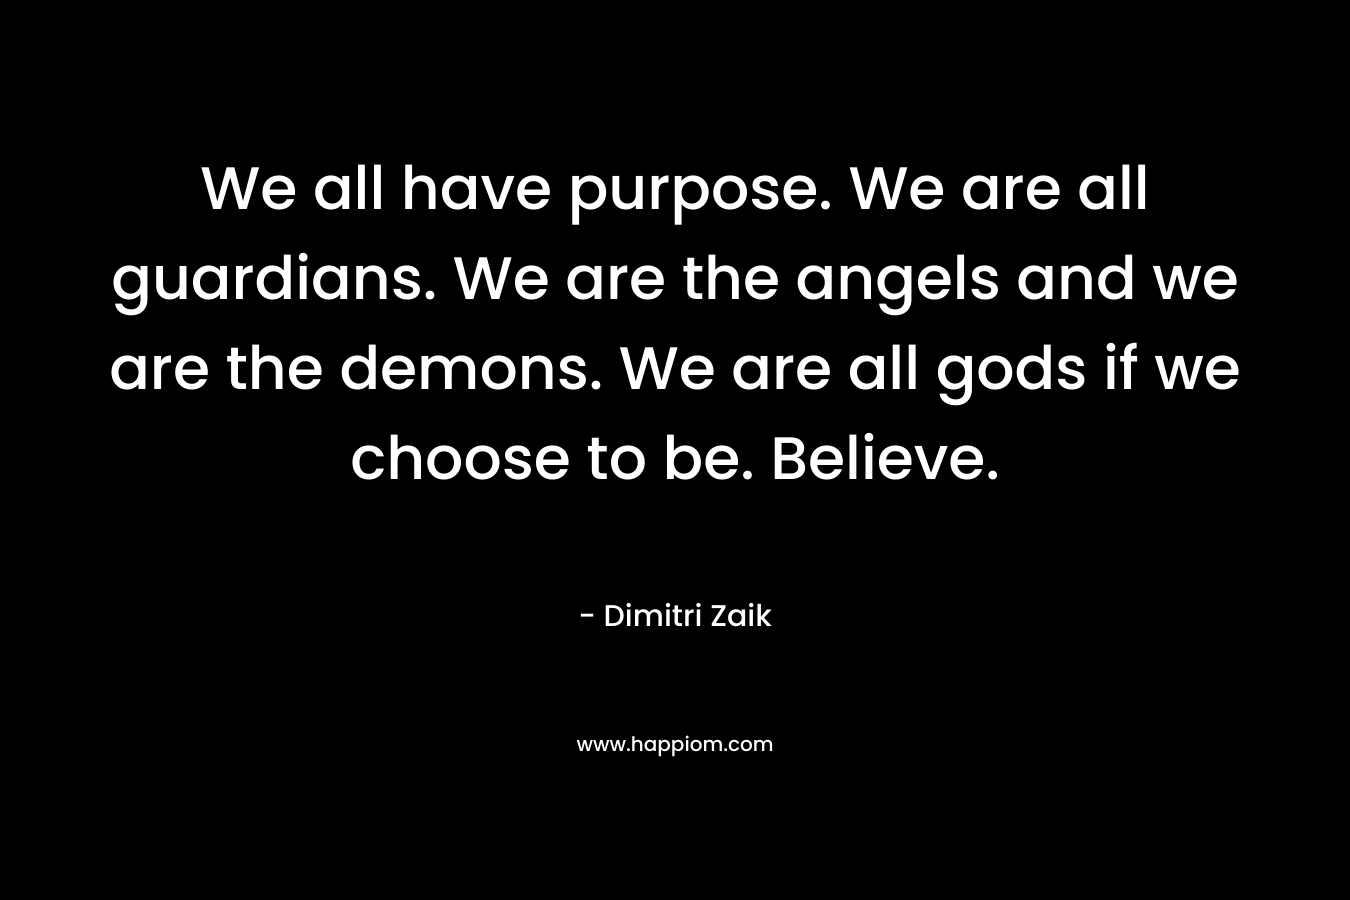 We all have purpose. We are all guardians. We are the angels and we are the demons. We are all gods if we choose to be. Believe.